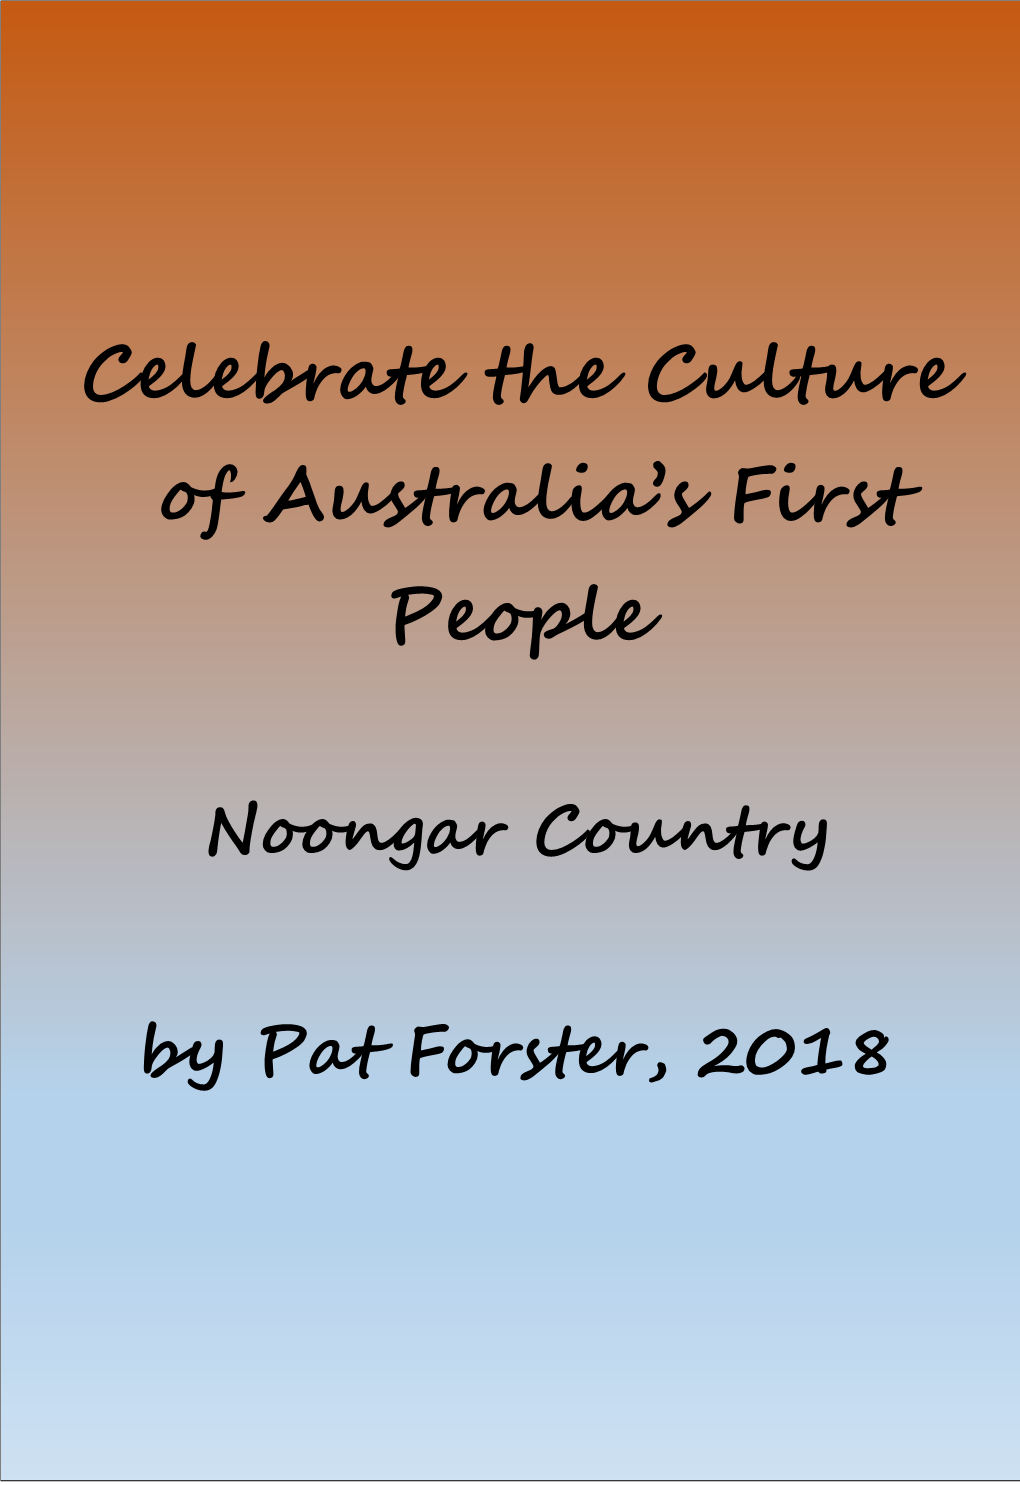 Celebrate the Culture of Australia's First People